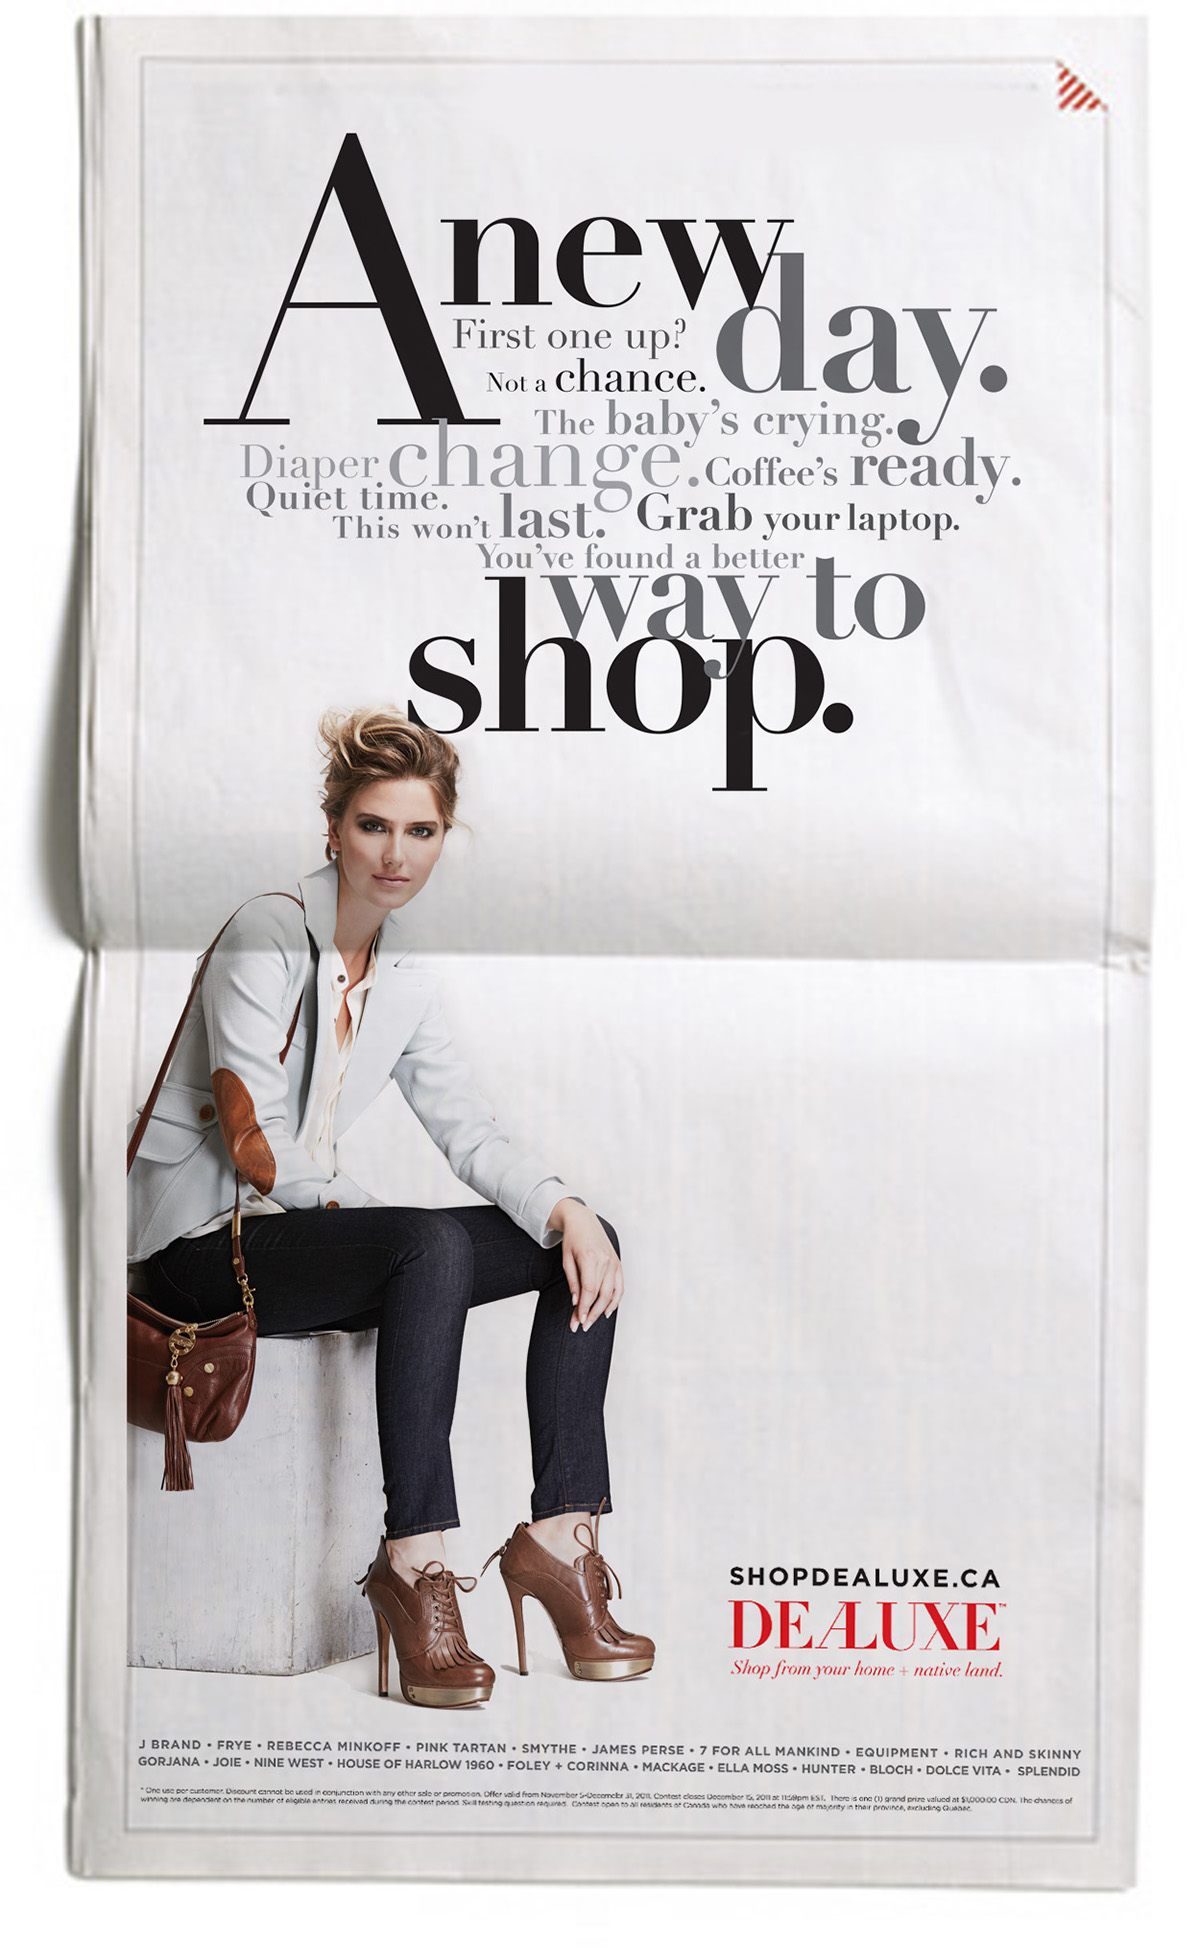 type fashionable newspaper ad shop Retail globe and mail Canada national dealuxe designer